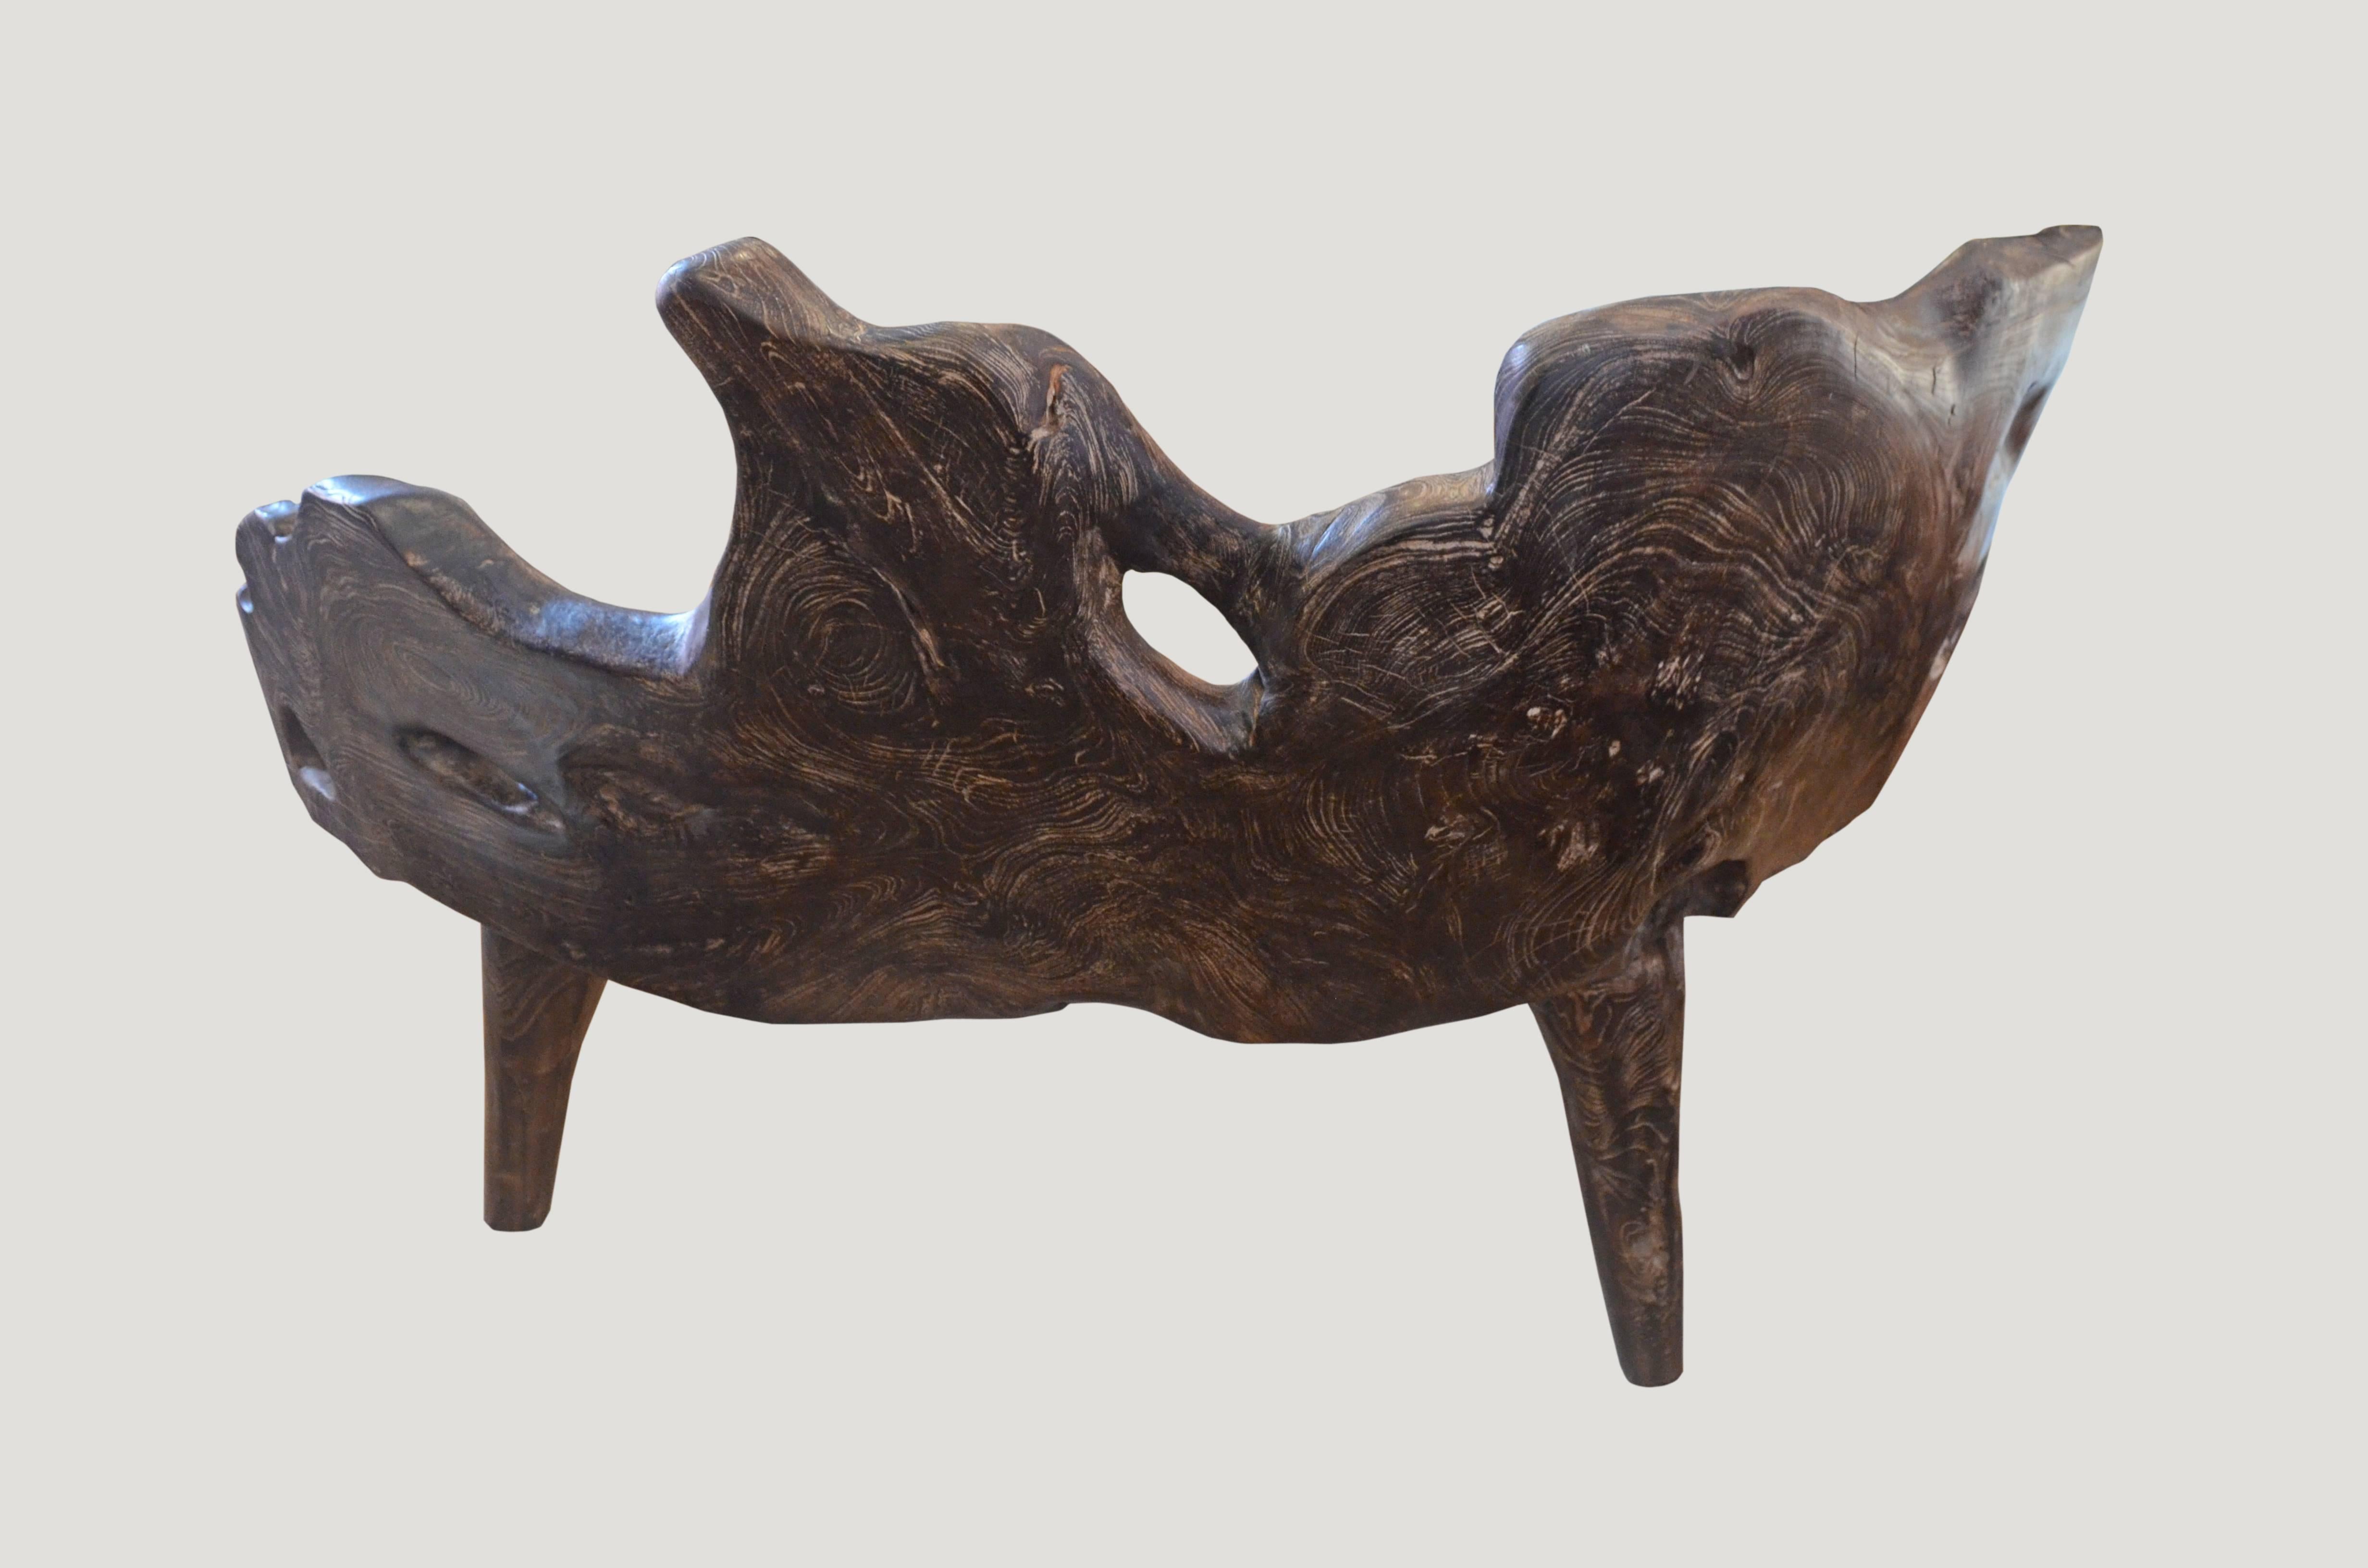 Organic shaped reclaimed teak bench carved from a single root found in the jungle in Sumatra. We added the legs, burnt it one time and finally added a cerused finish. The inside seat section is left natural teak and polished in contrast to the